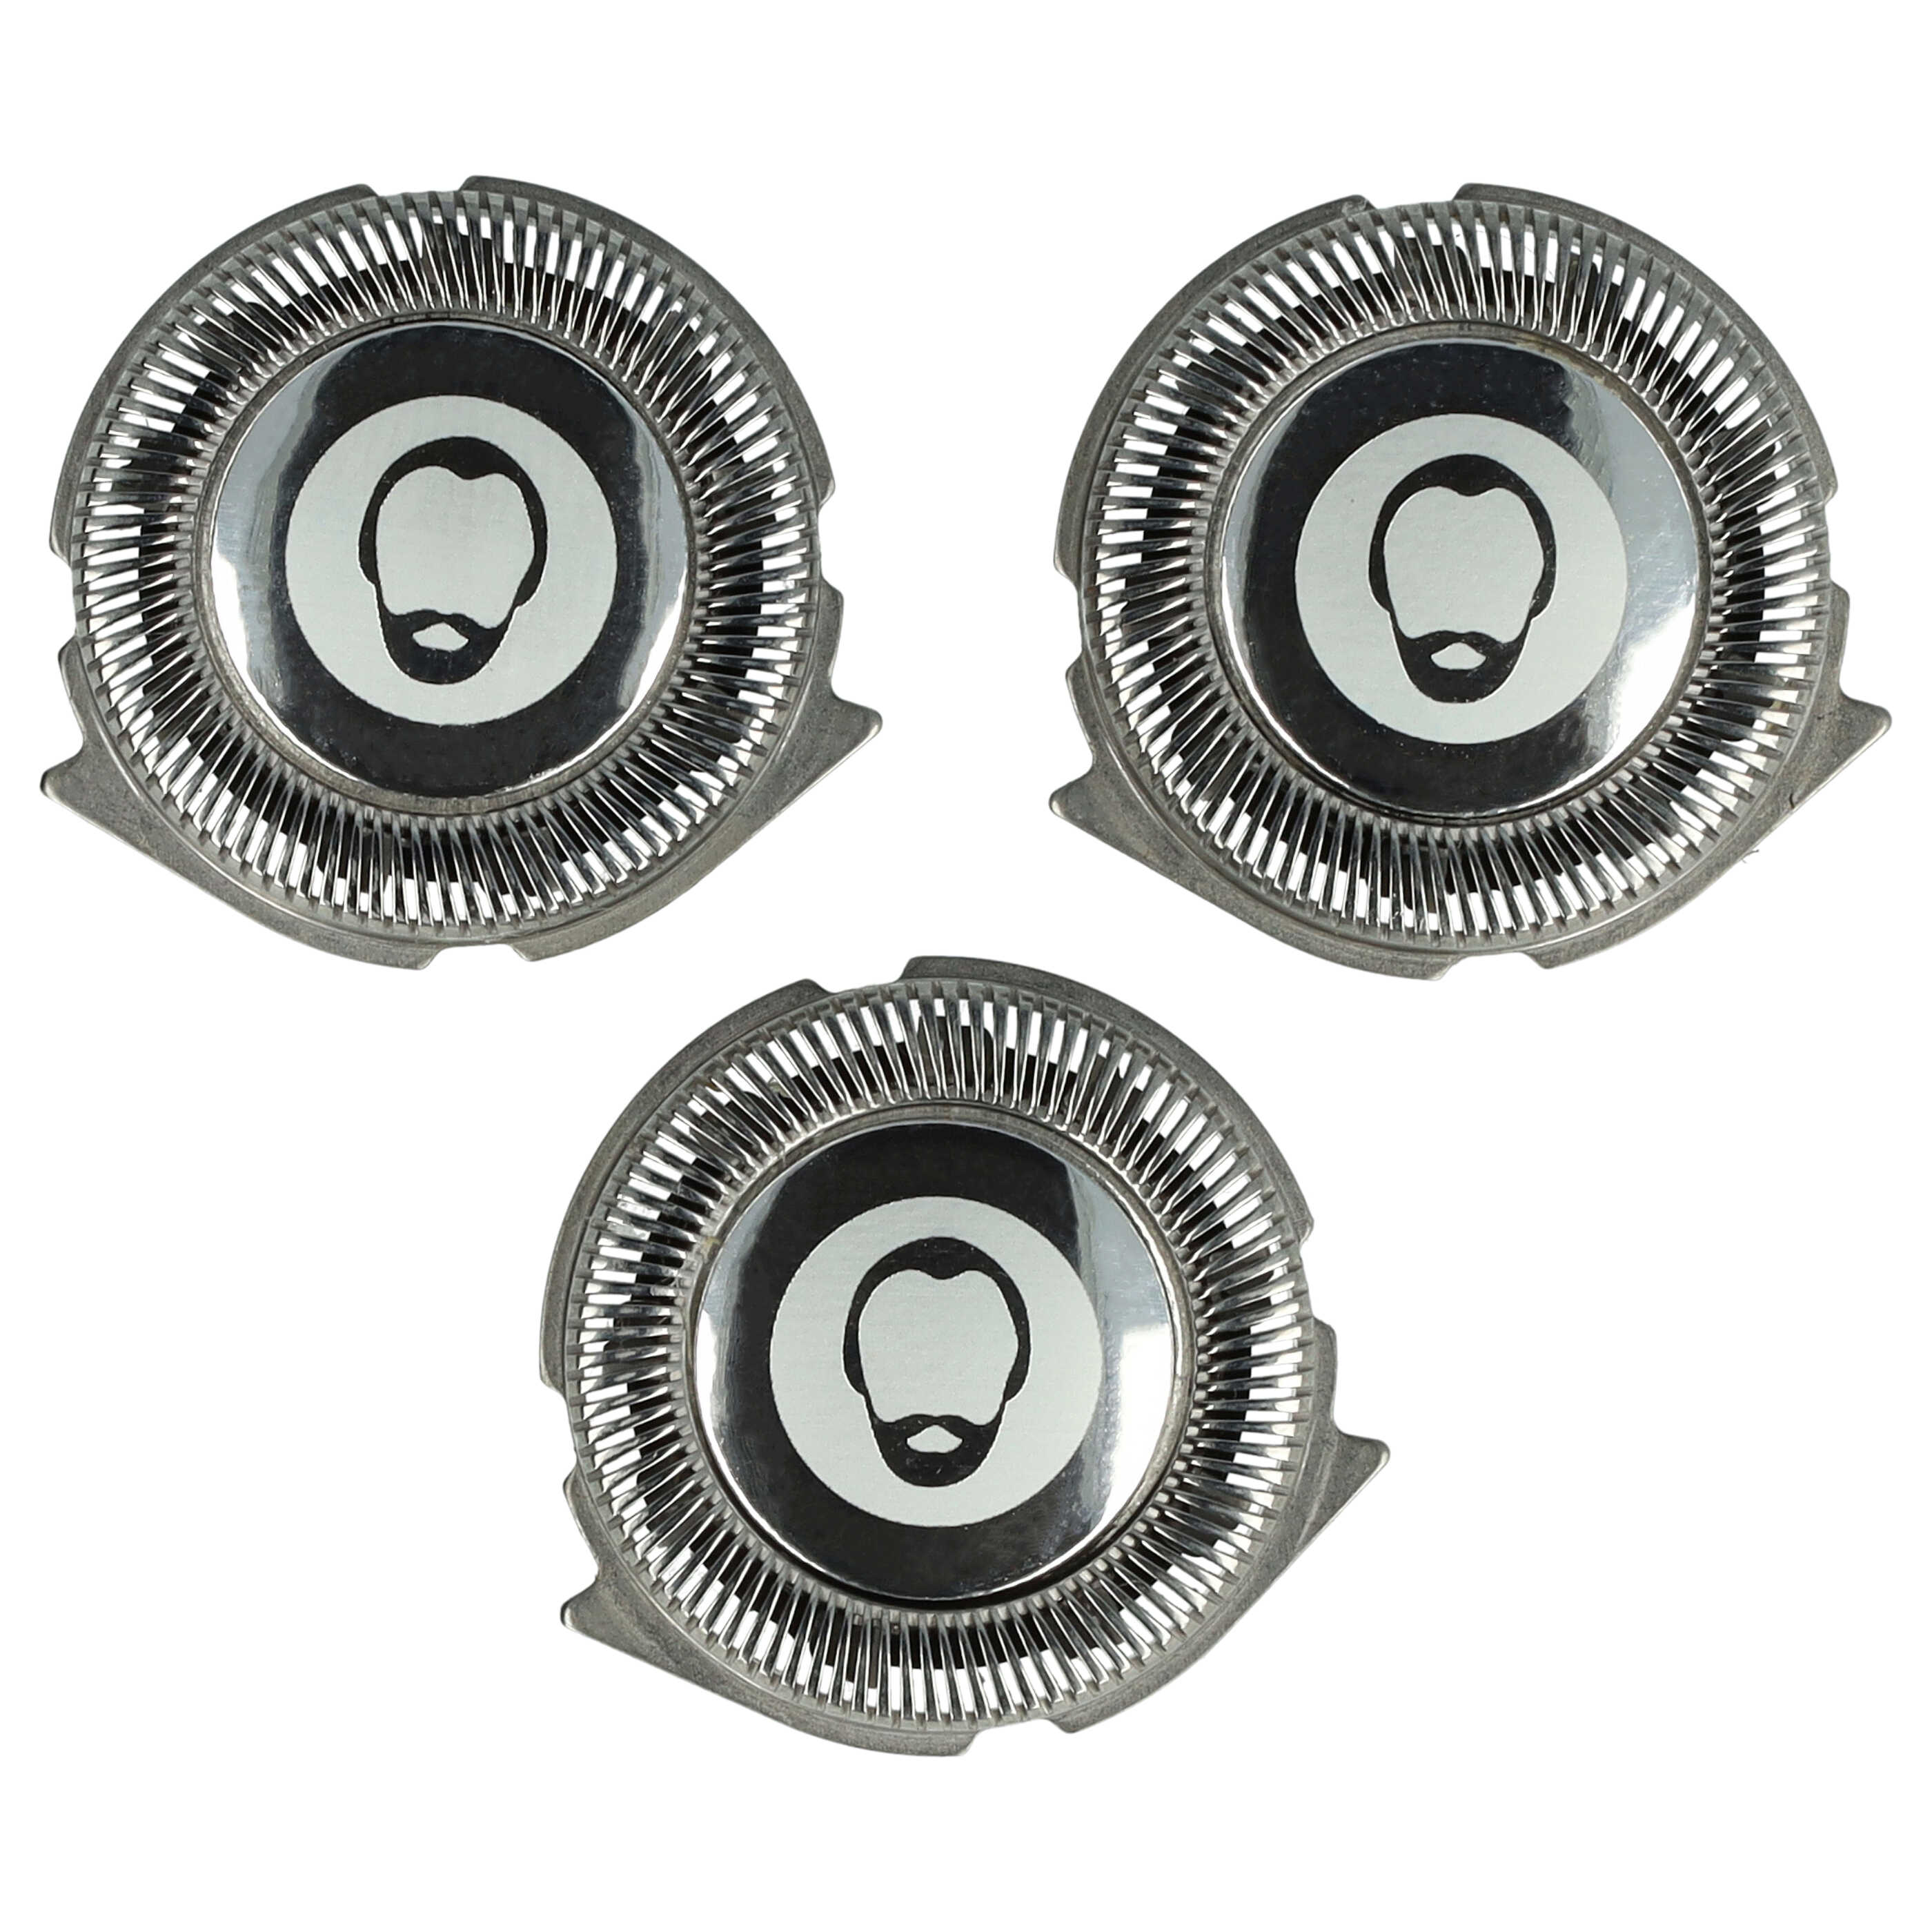 3x shaving head as Replacement for Philips SH30, SH30/50 for Philips Shaver -nickel